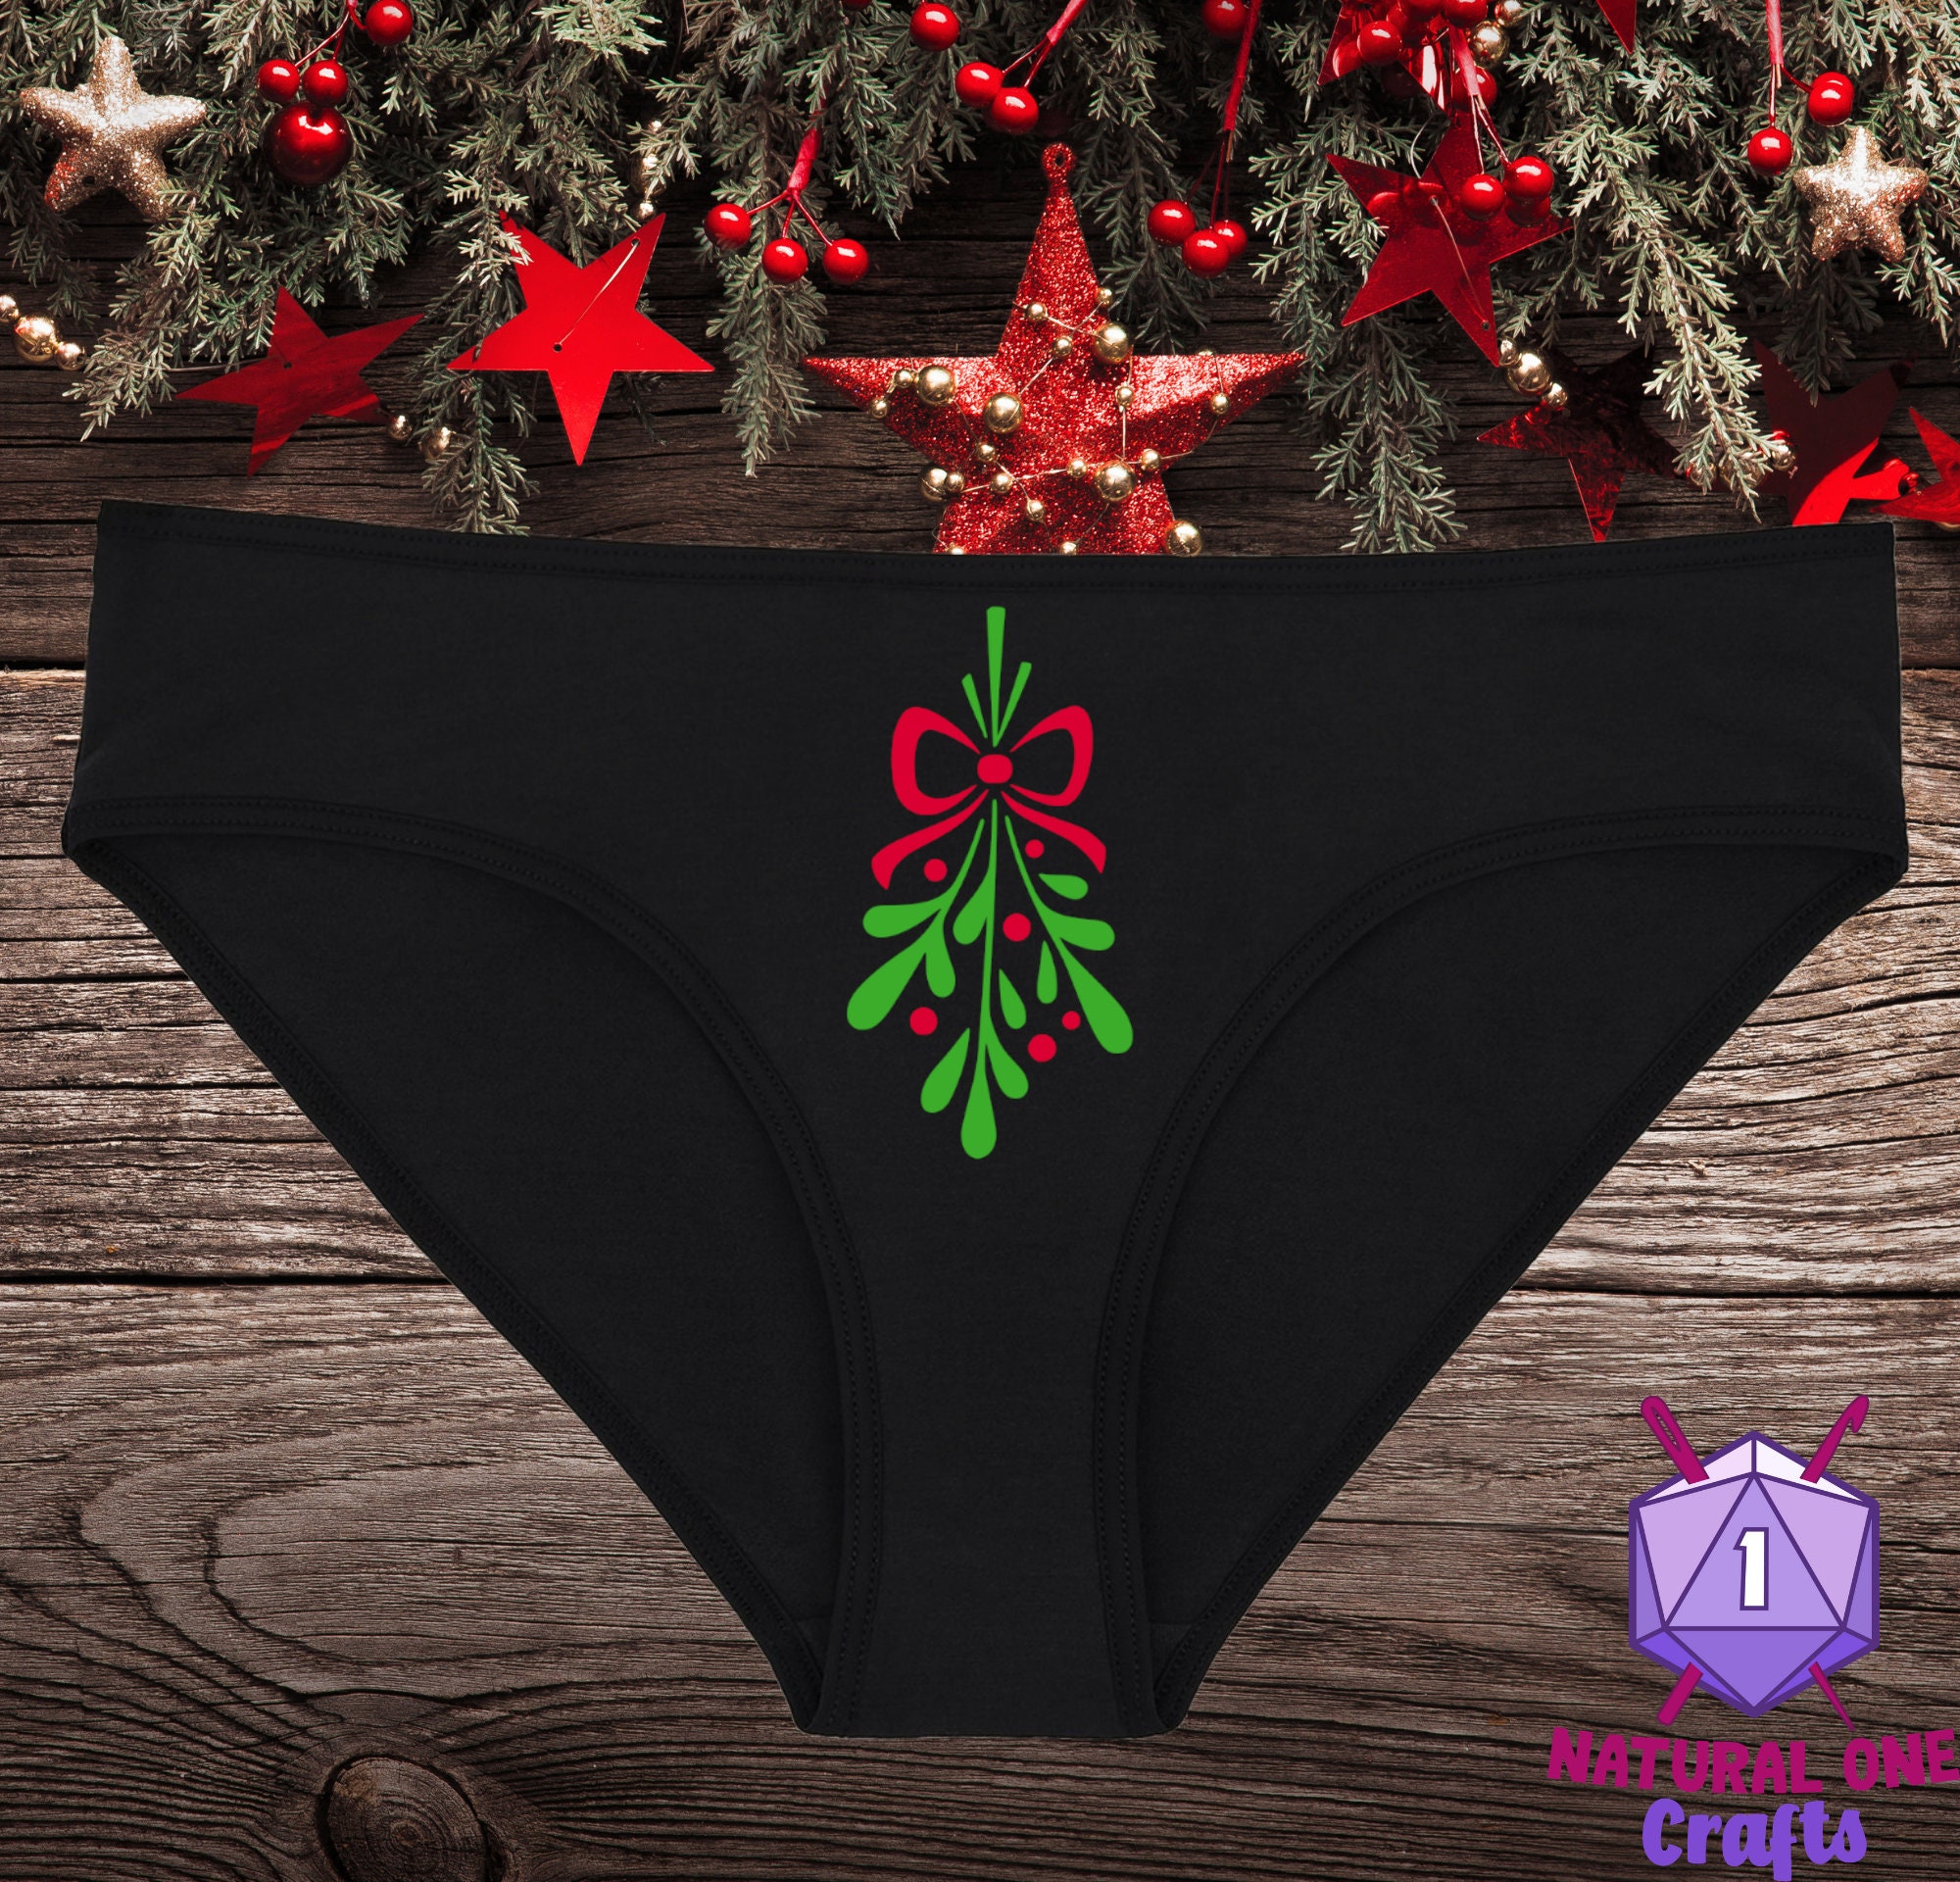 Mistletoe Black Underwear, Dainty & Dangerous Christmas Panties, Great  Holiday Lingerie, Multiple Sizes Available Small-3xl 